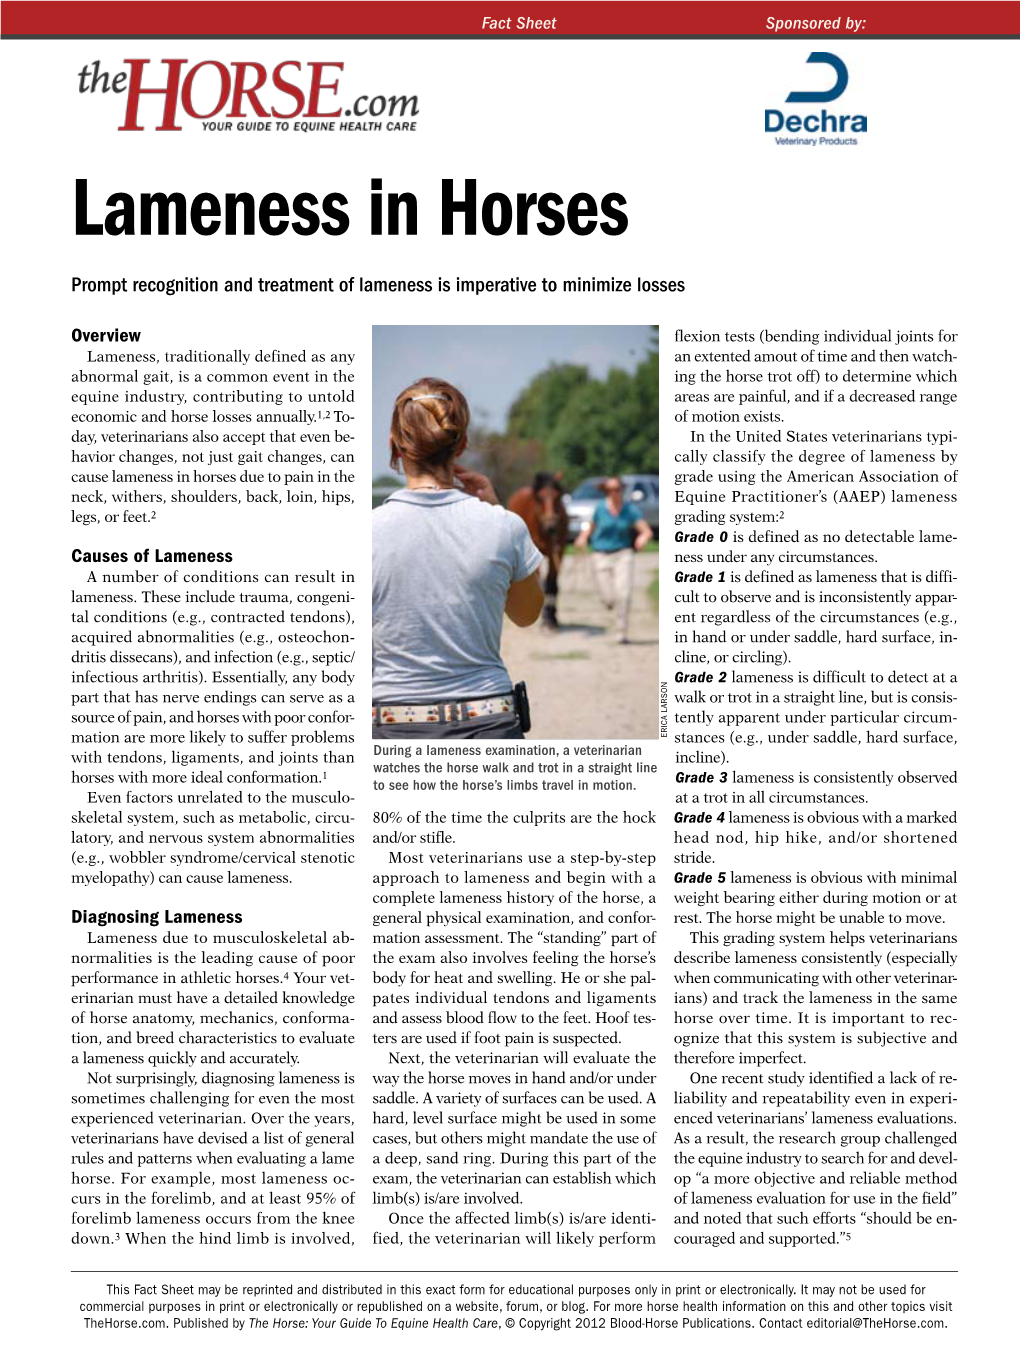 Lameness in Horses Prompt Recognition and Treatment of Lameness Is Imperative to Minimize Losses